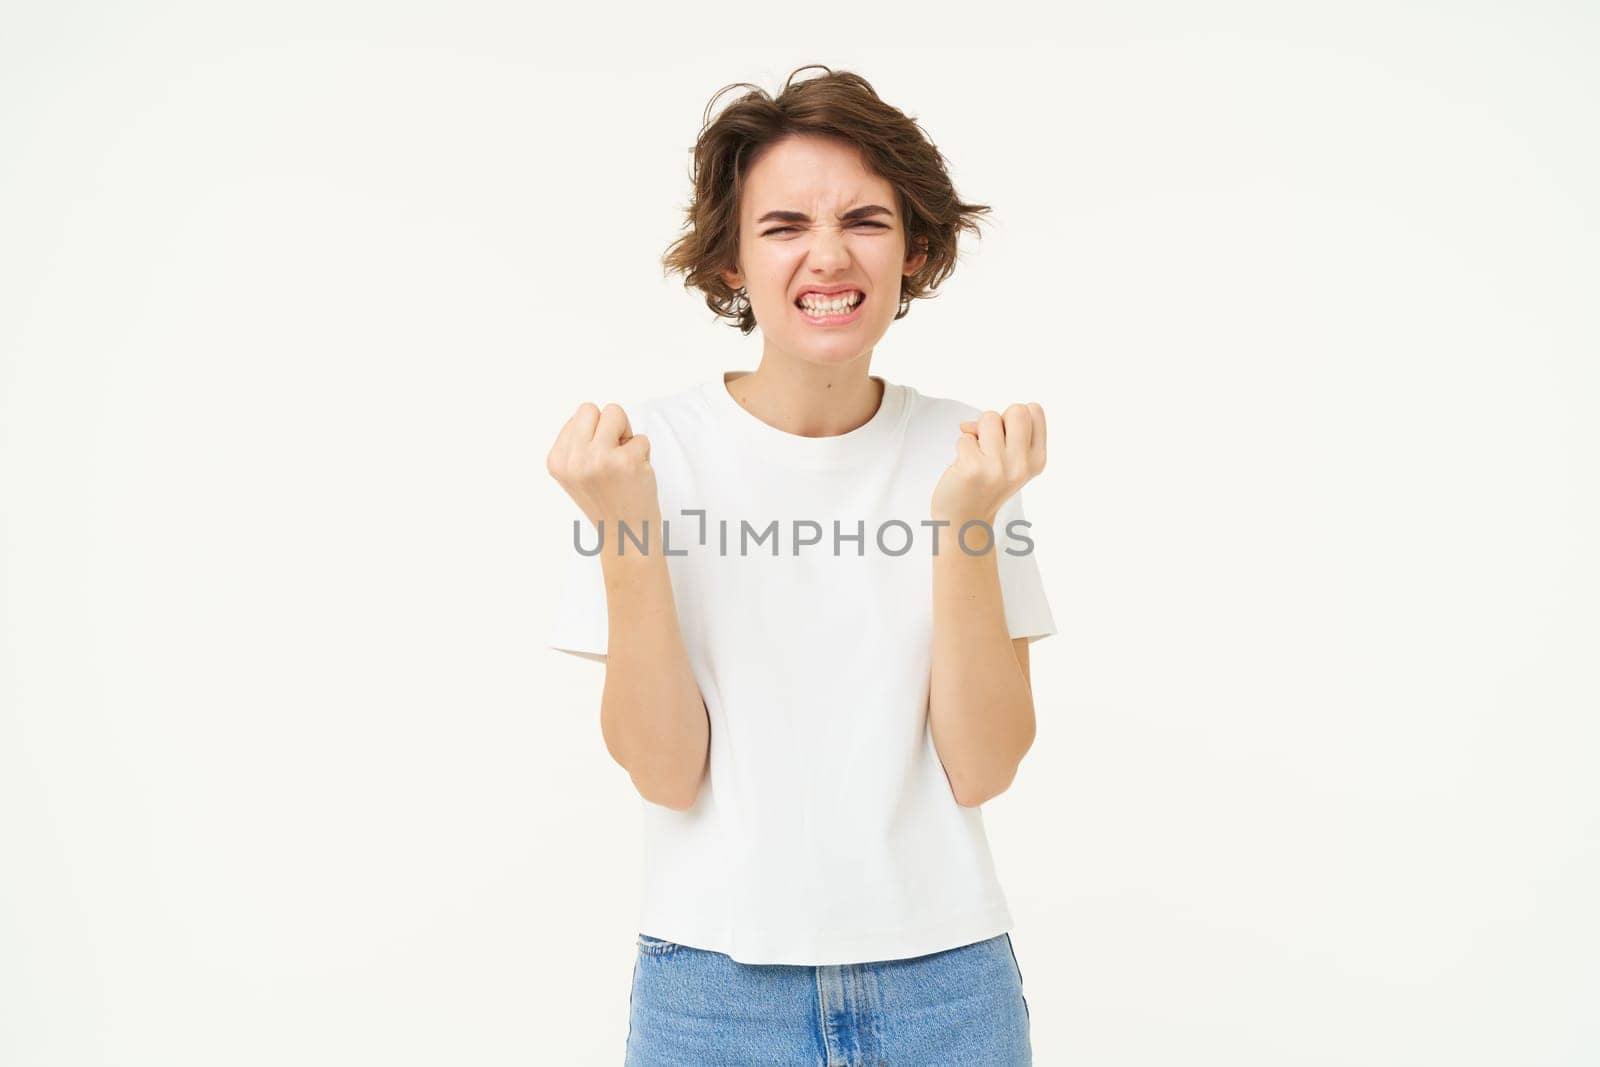 Portrait of confident and motivated woman, clenches her fists and looks self-assured, stands over white background. Copy space